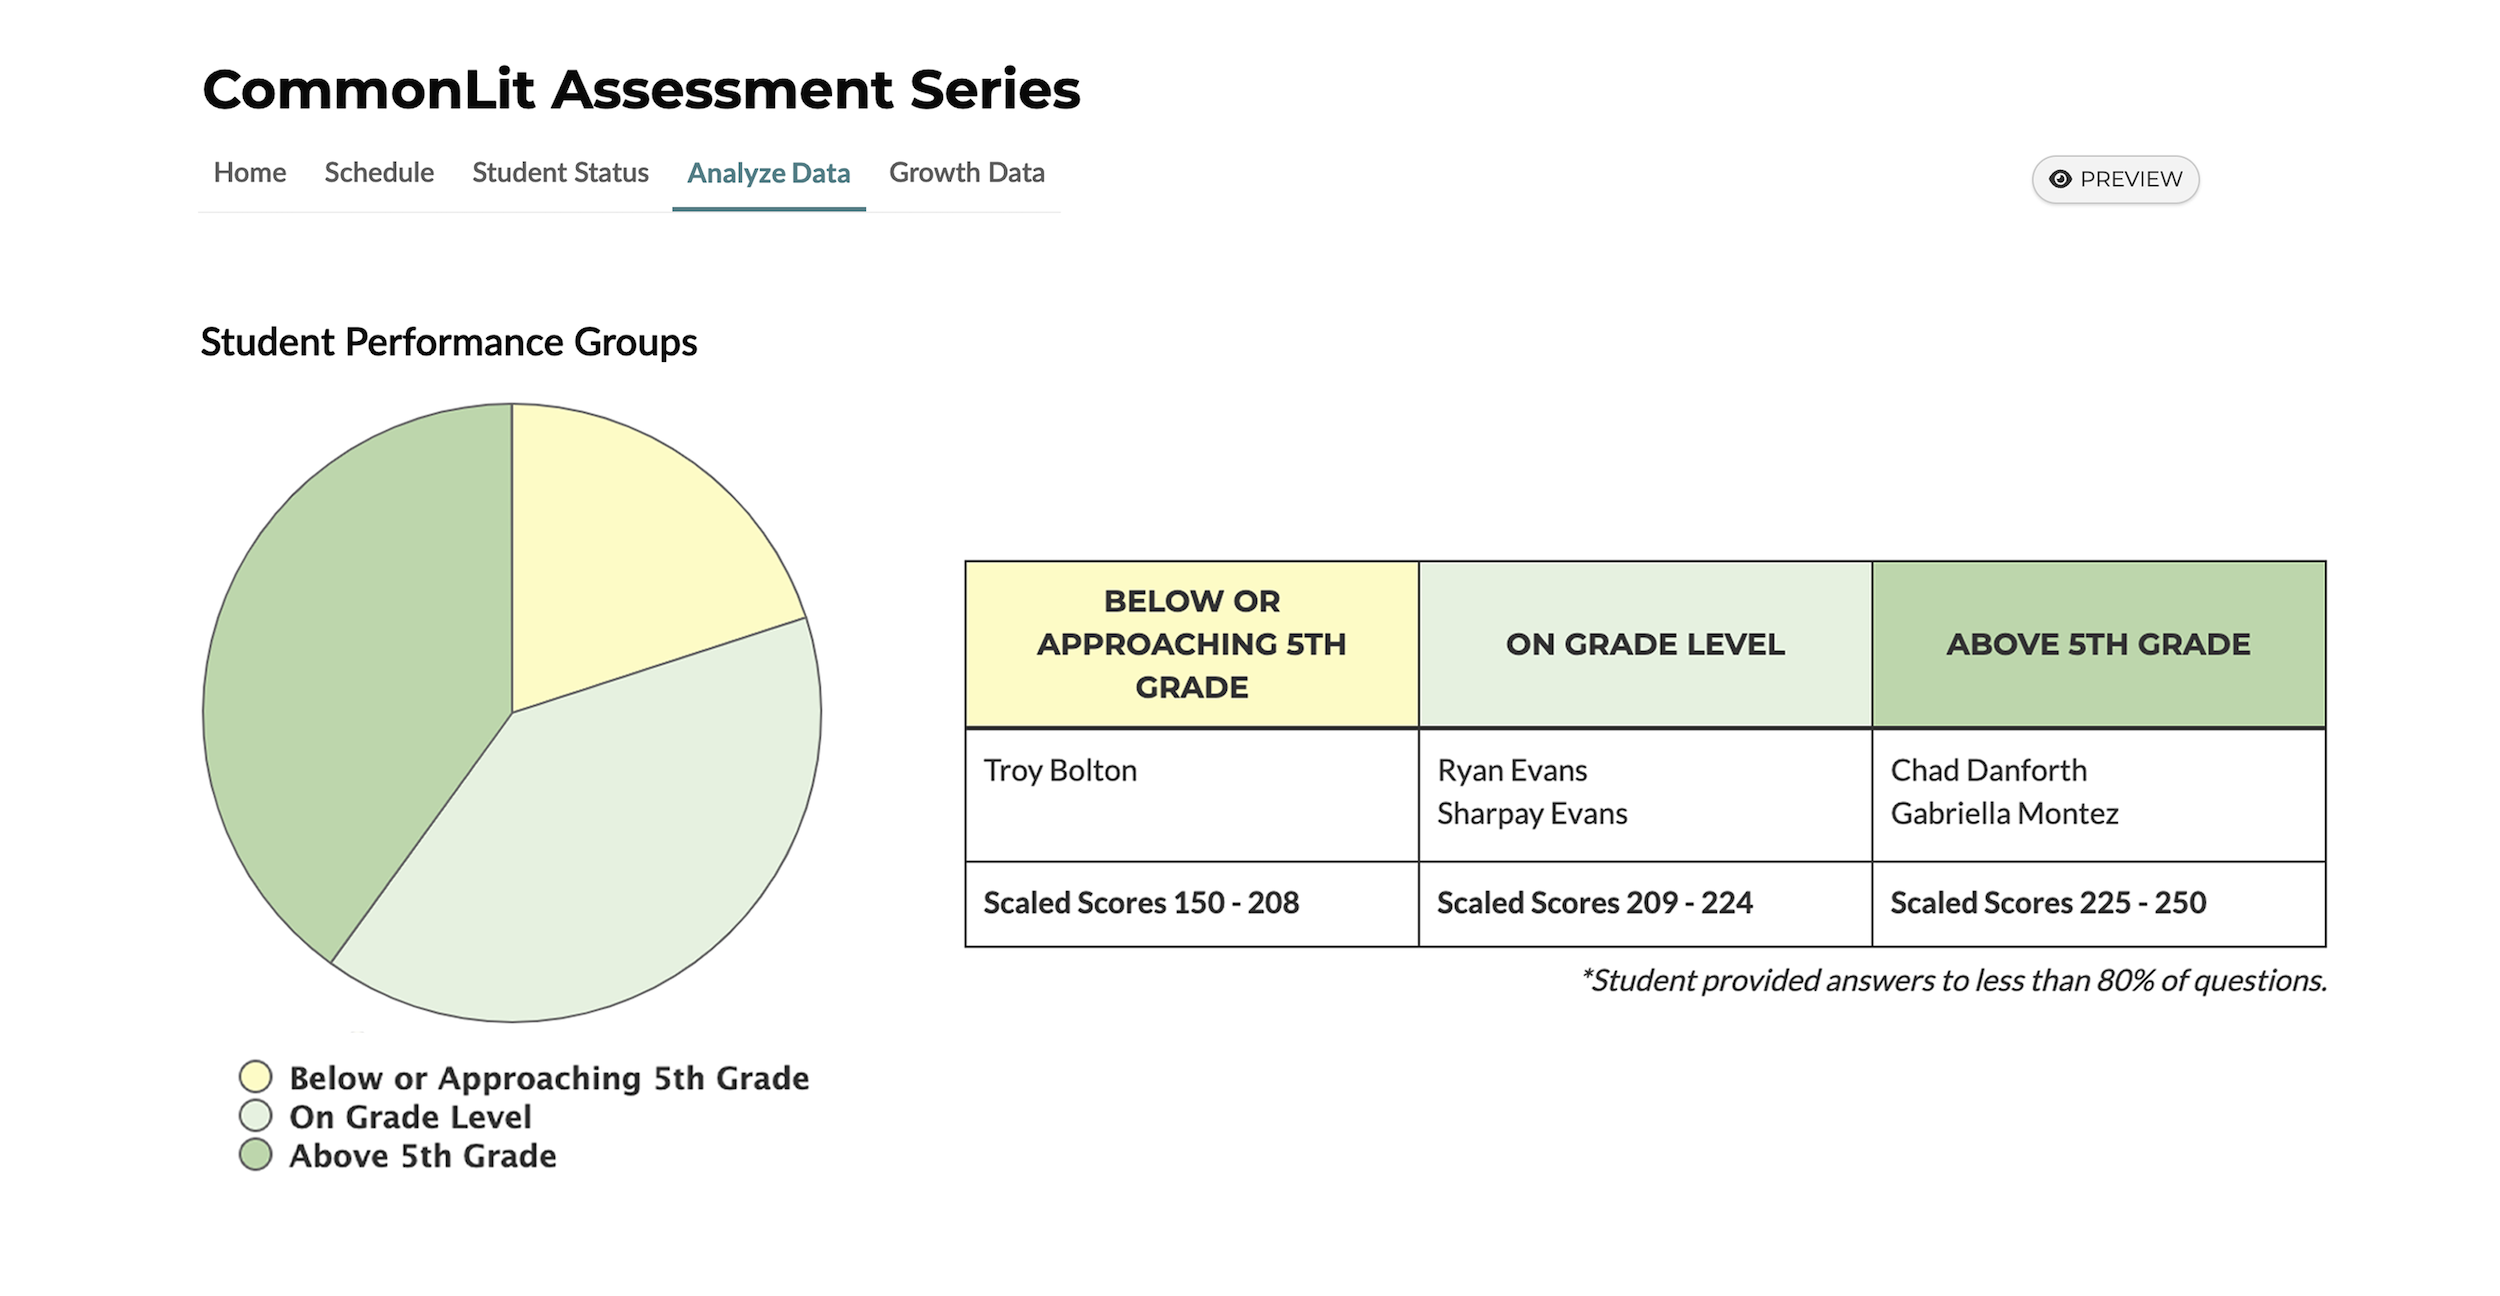 A screenshot showing a pie chart and table of student performance data from the CommonLit Assesment Series. The pie chart and table have three categories: below or approaching 5th grade, on grade level, and above 5th grade.